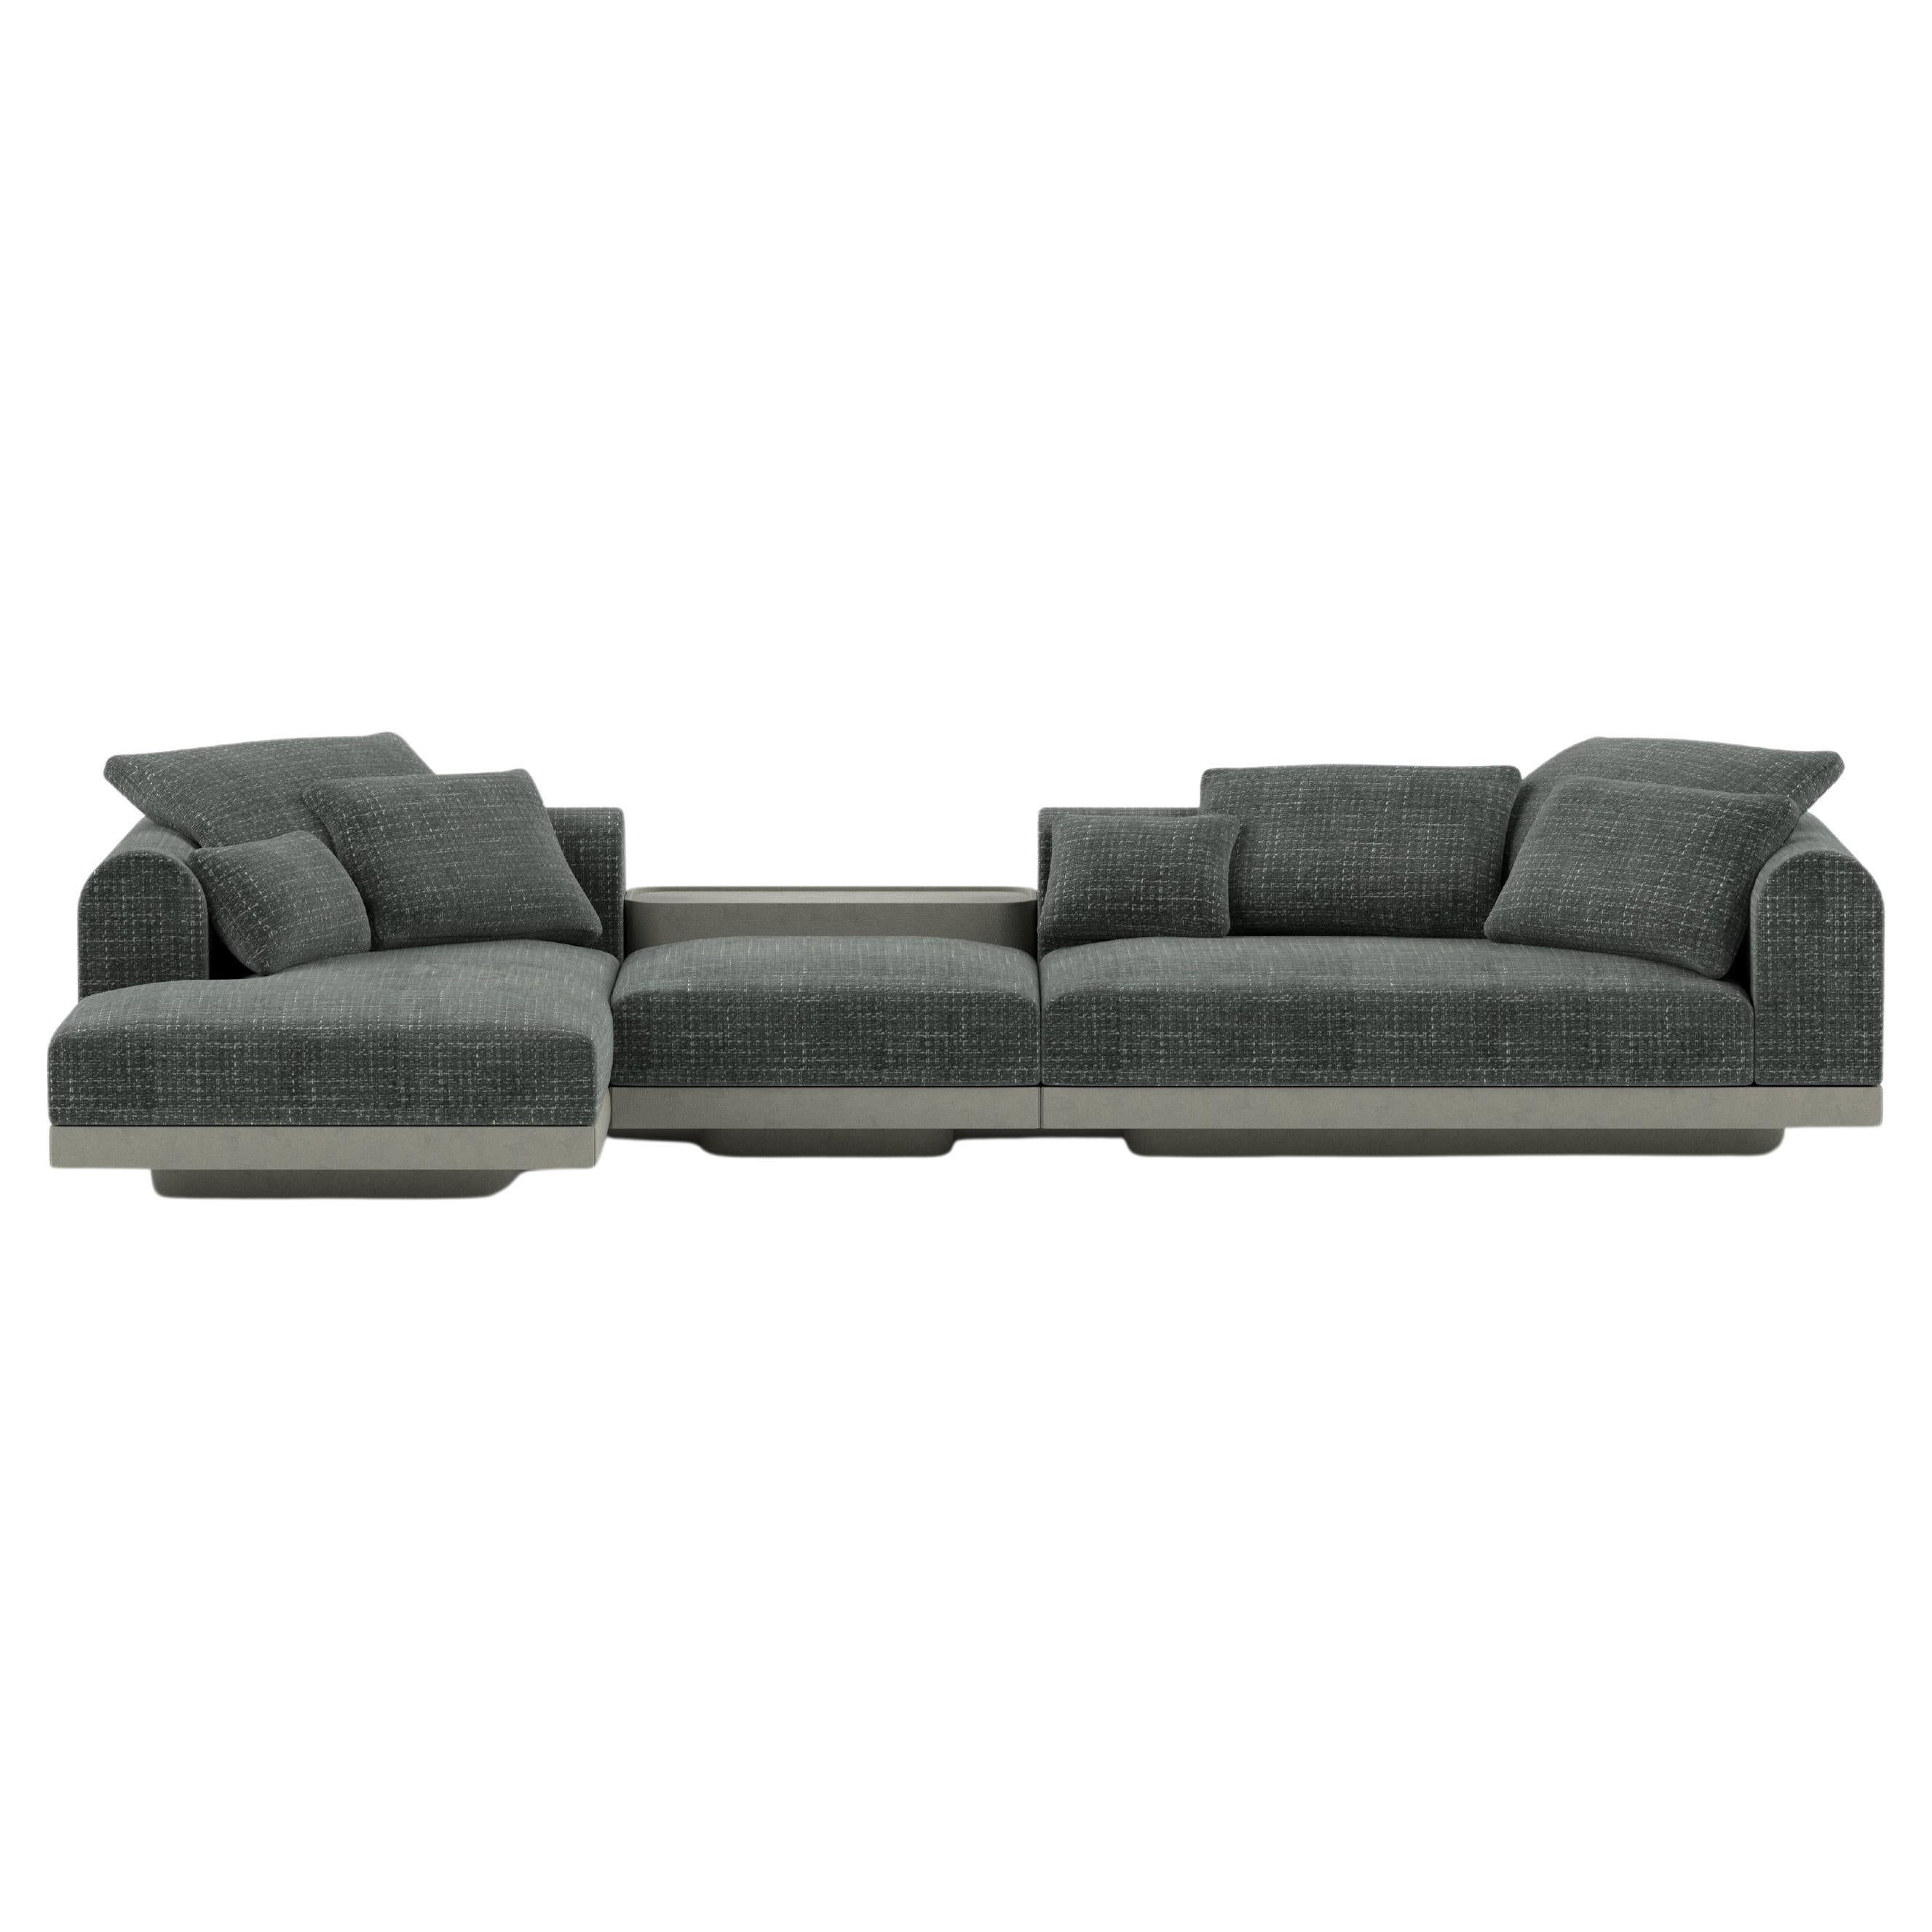 'Aqueduct' Contemporary Sofa by Poiat, Setup 3, Yang 95, High Plinth For Sale